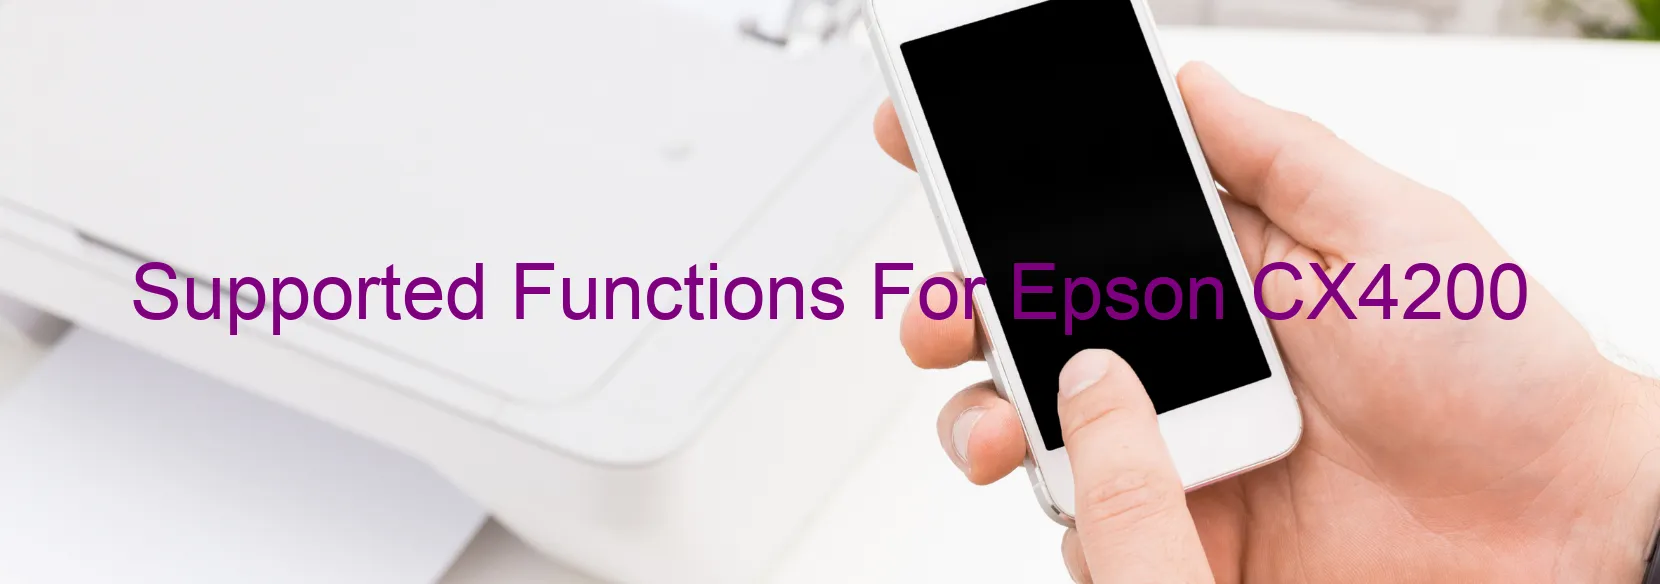 supported-functions-for-epson-cx4200.webp